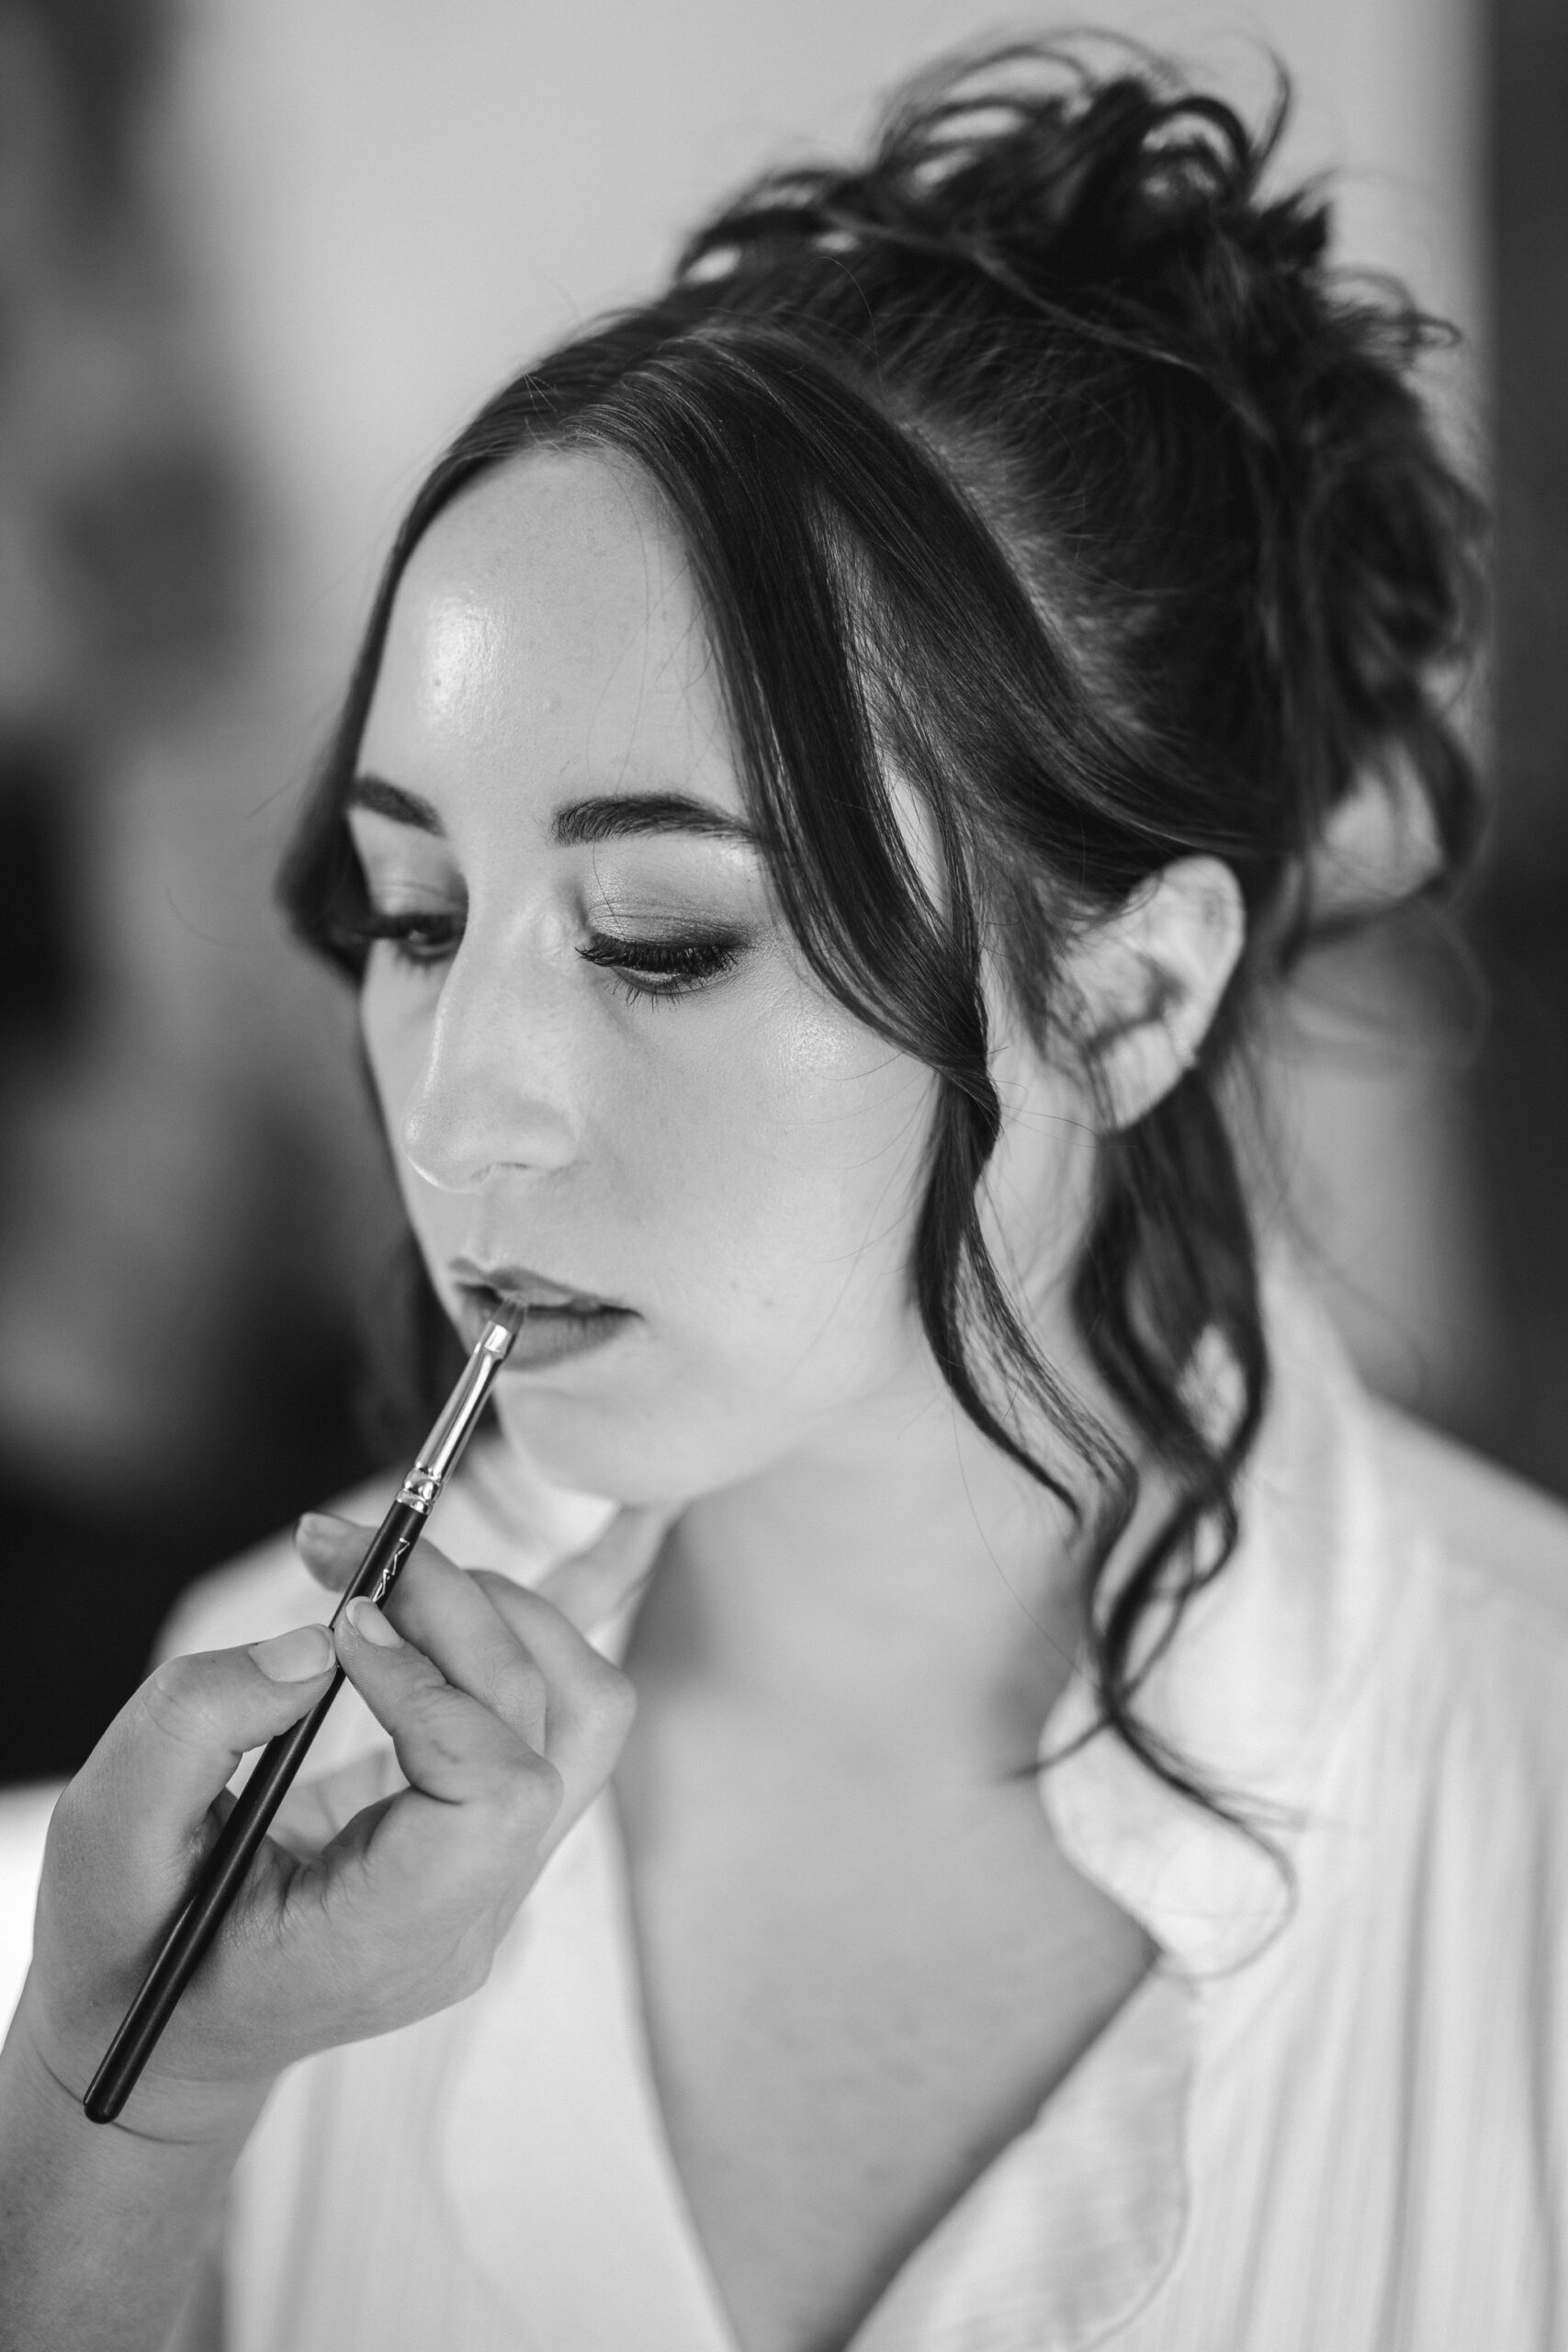 bride gets lipstick put on during getting ready photos during elopement day in colorado